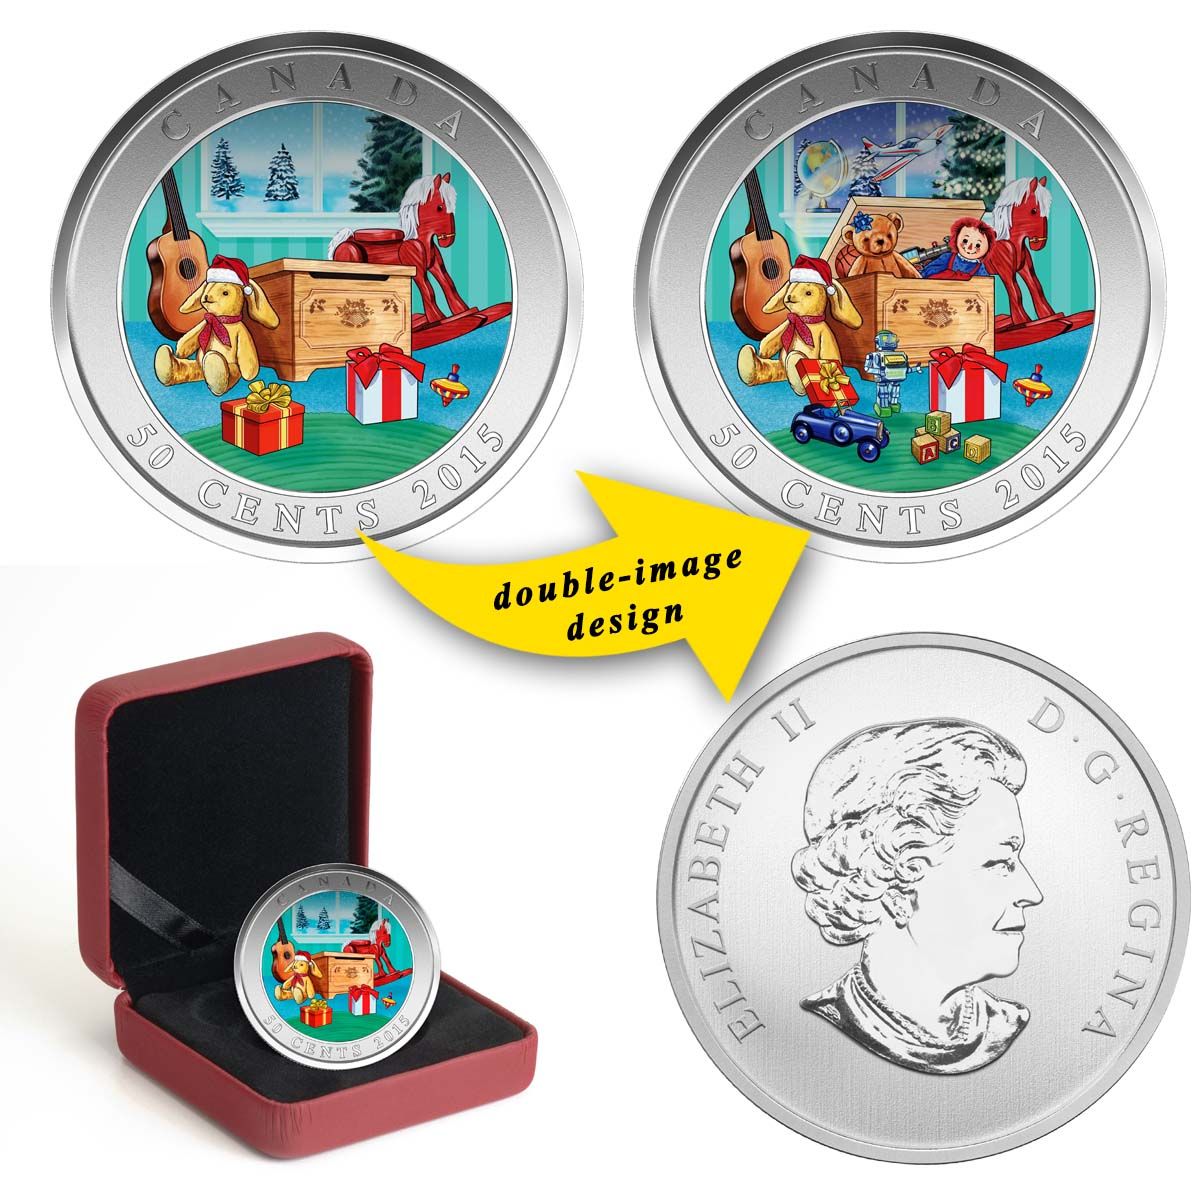 2015 Canada Holiday Gift Set of Coins